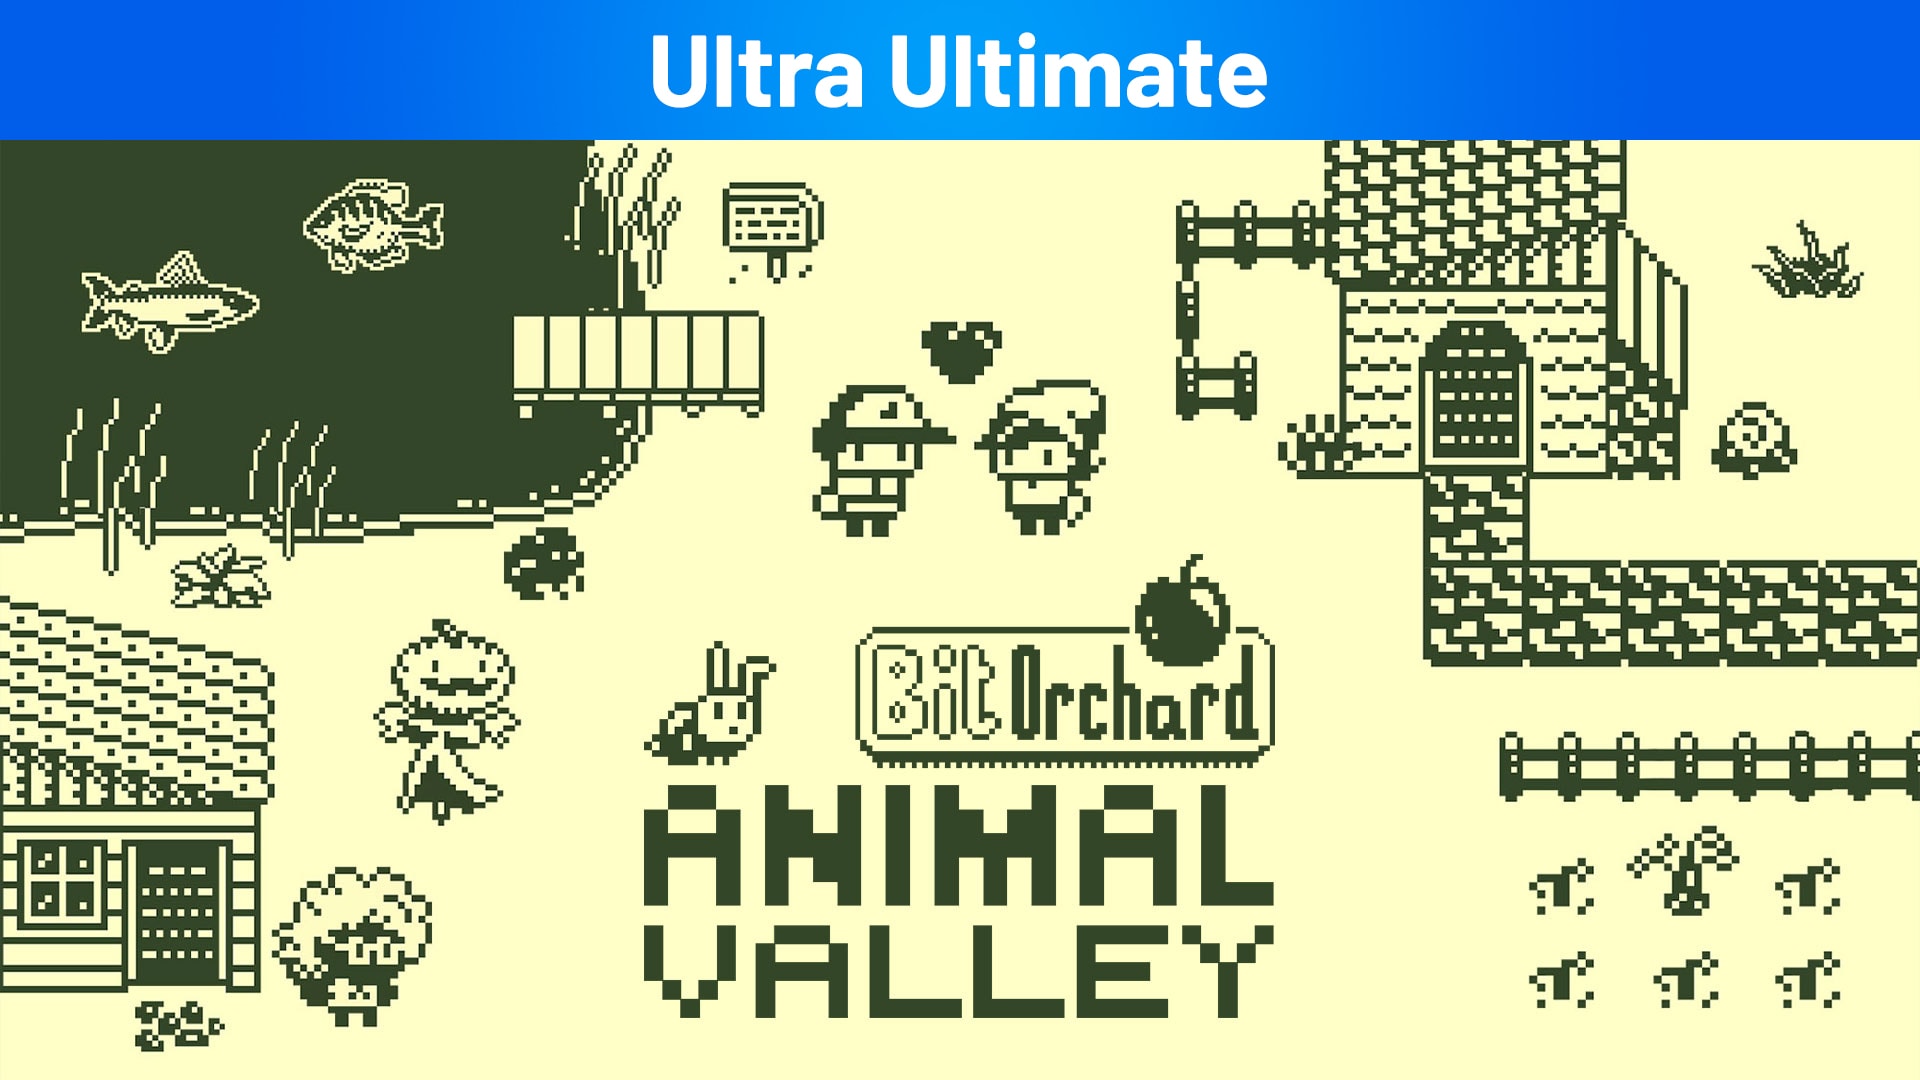 Bit Orchard: Animal Valley Ultra Ultimate 1